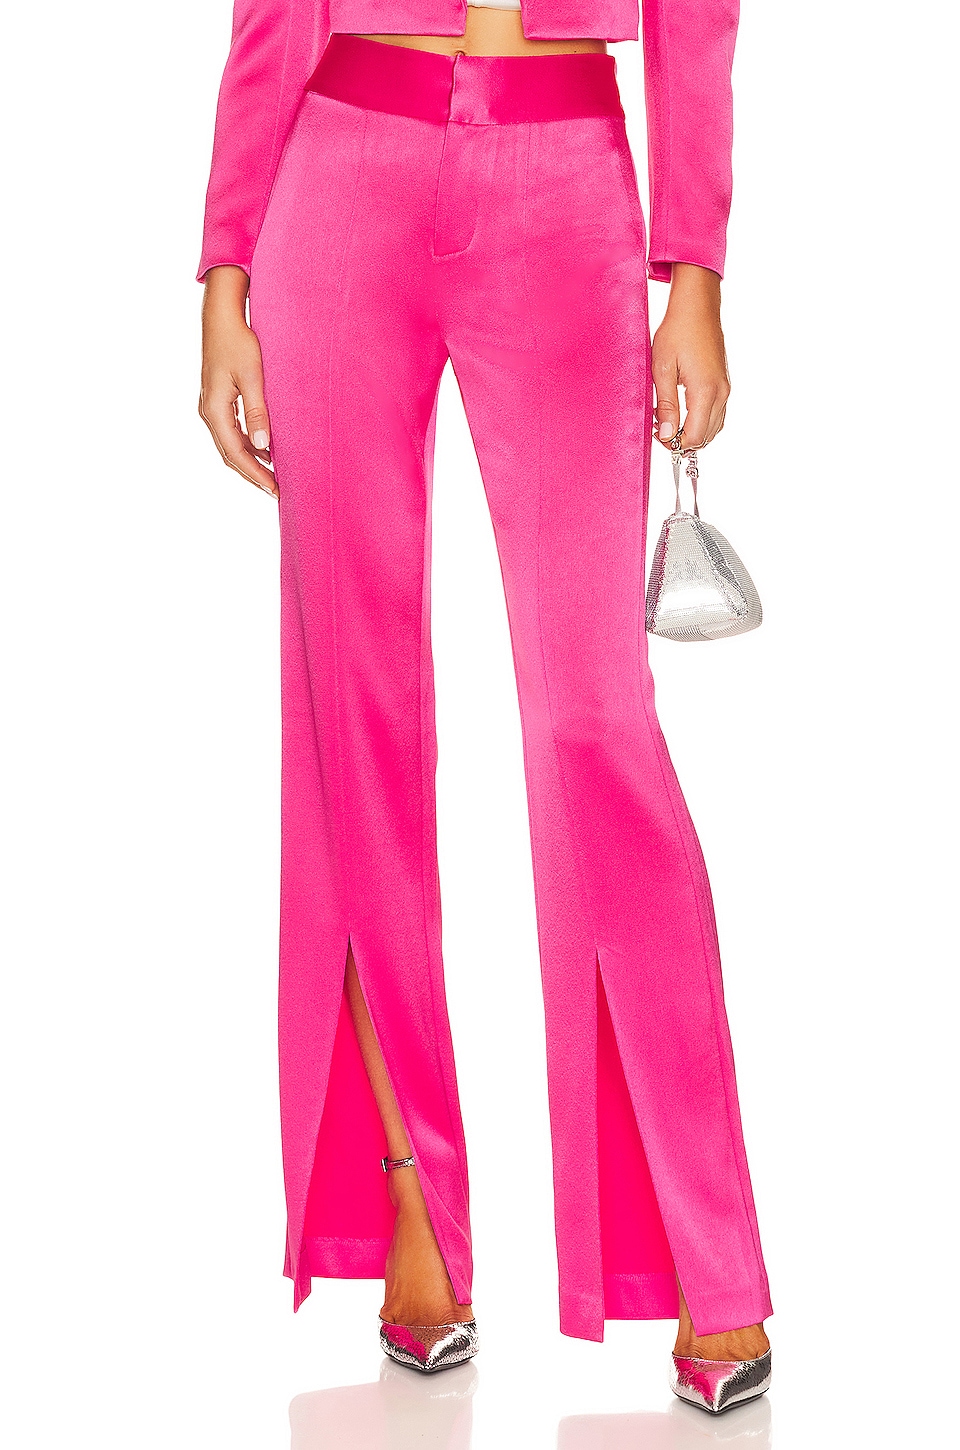 Alice + Olivia Jody High Waisted Front Slit Pant in Candy | REVOLVE